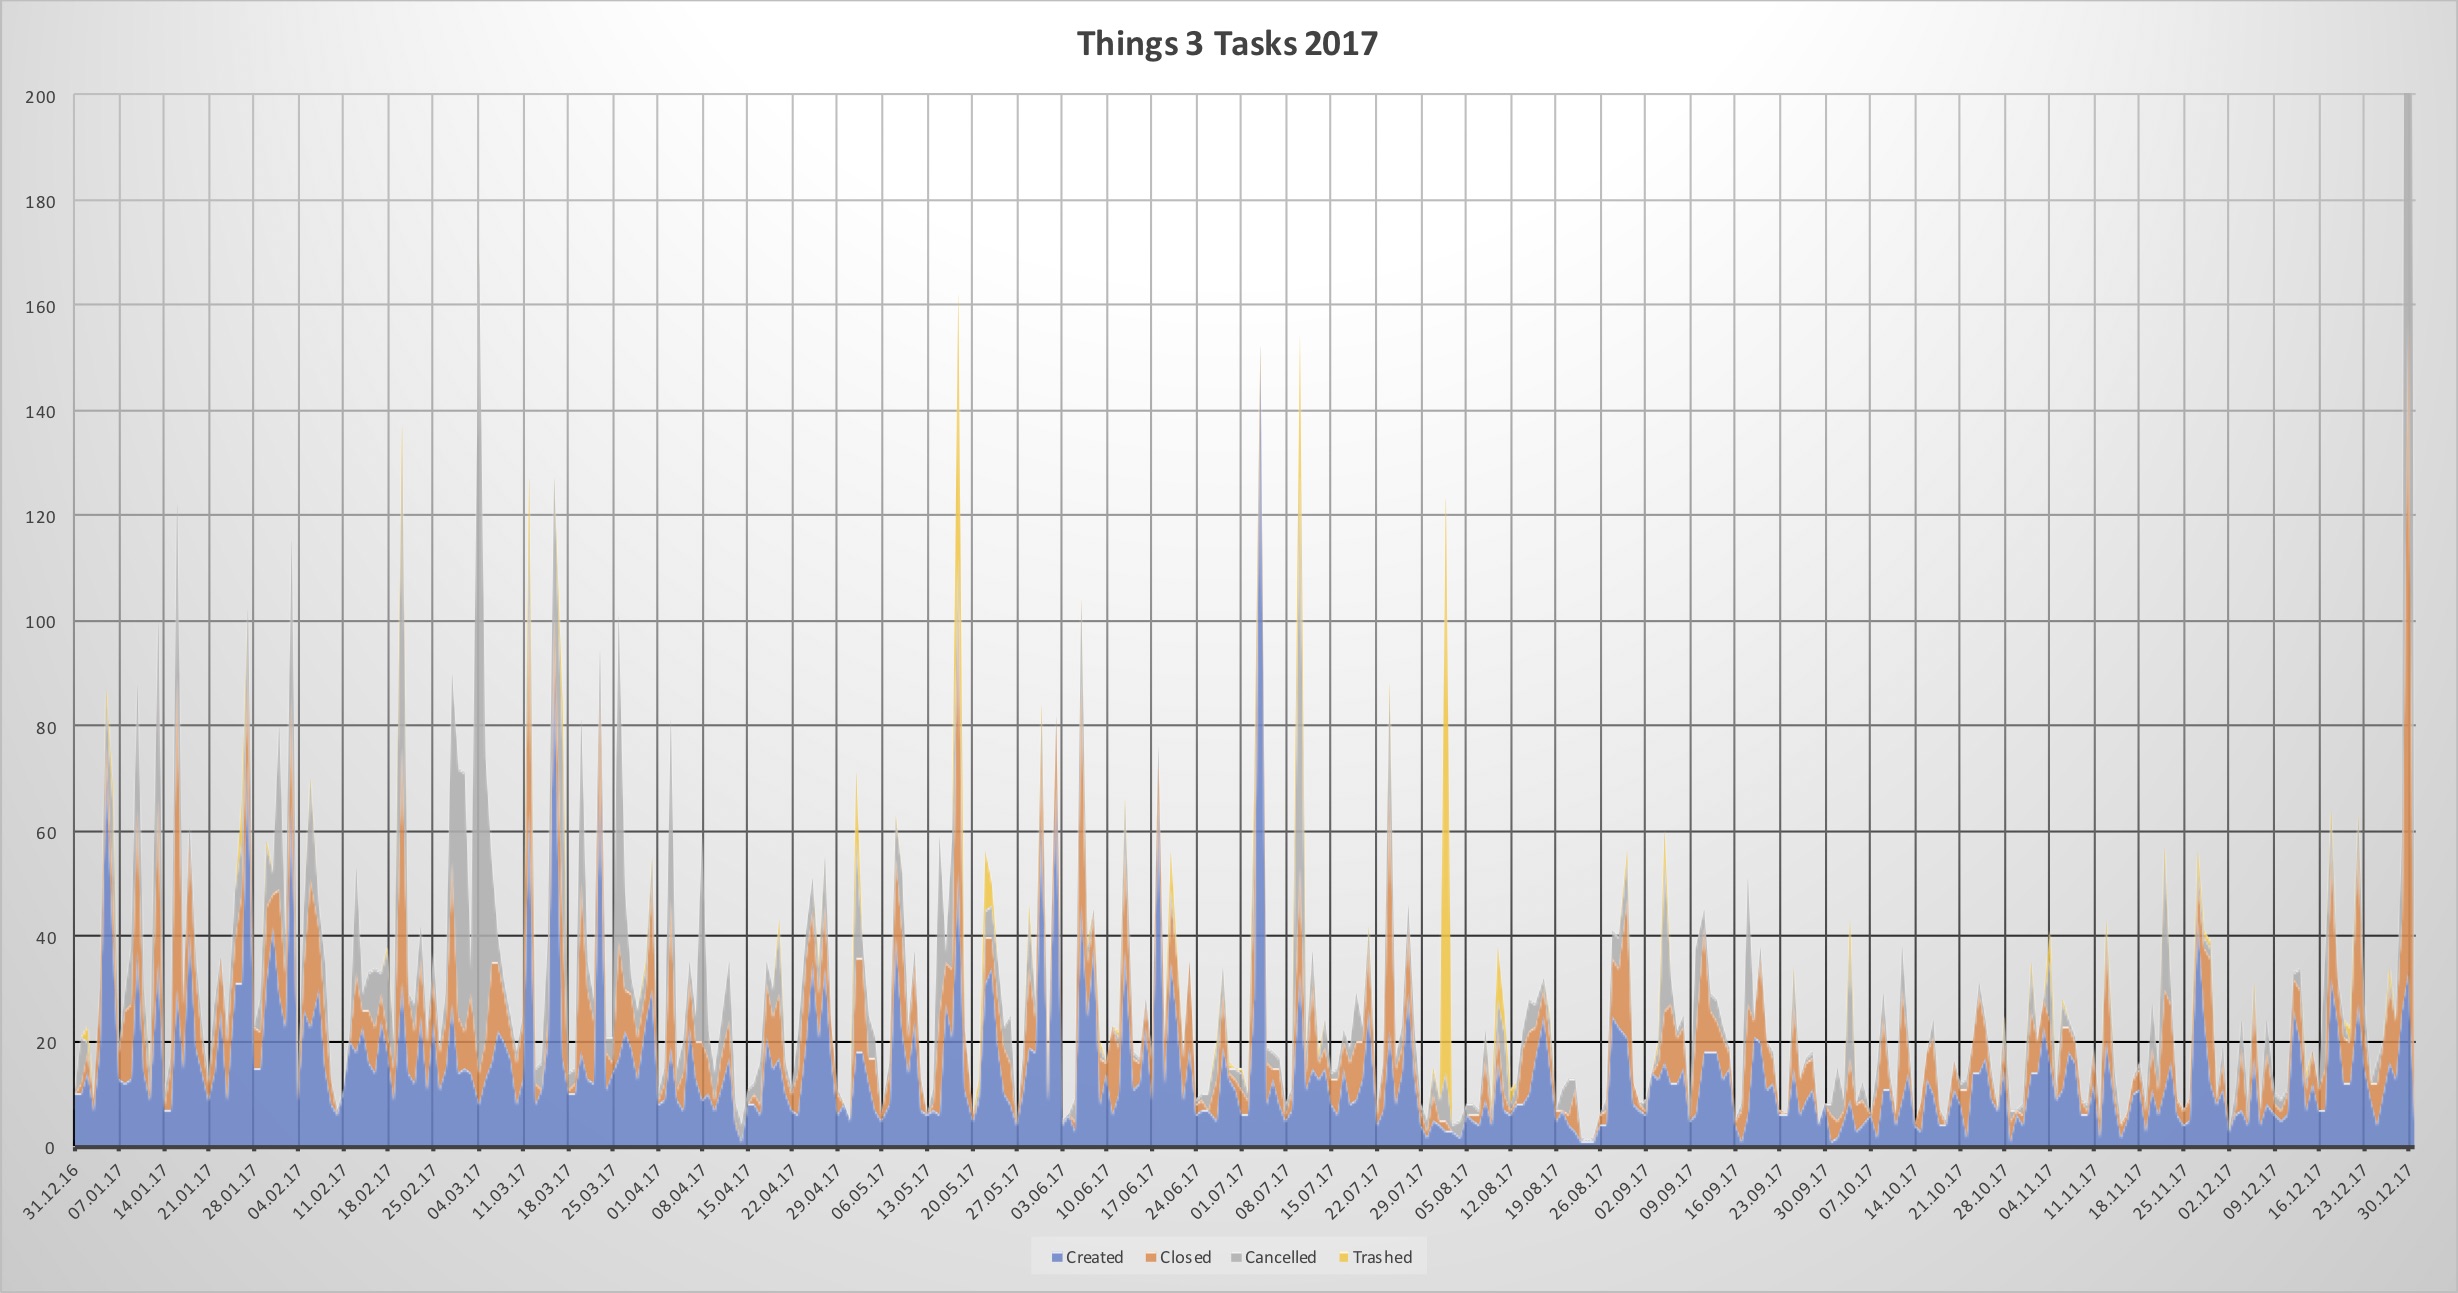 Tasks in the last year